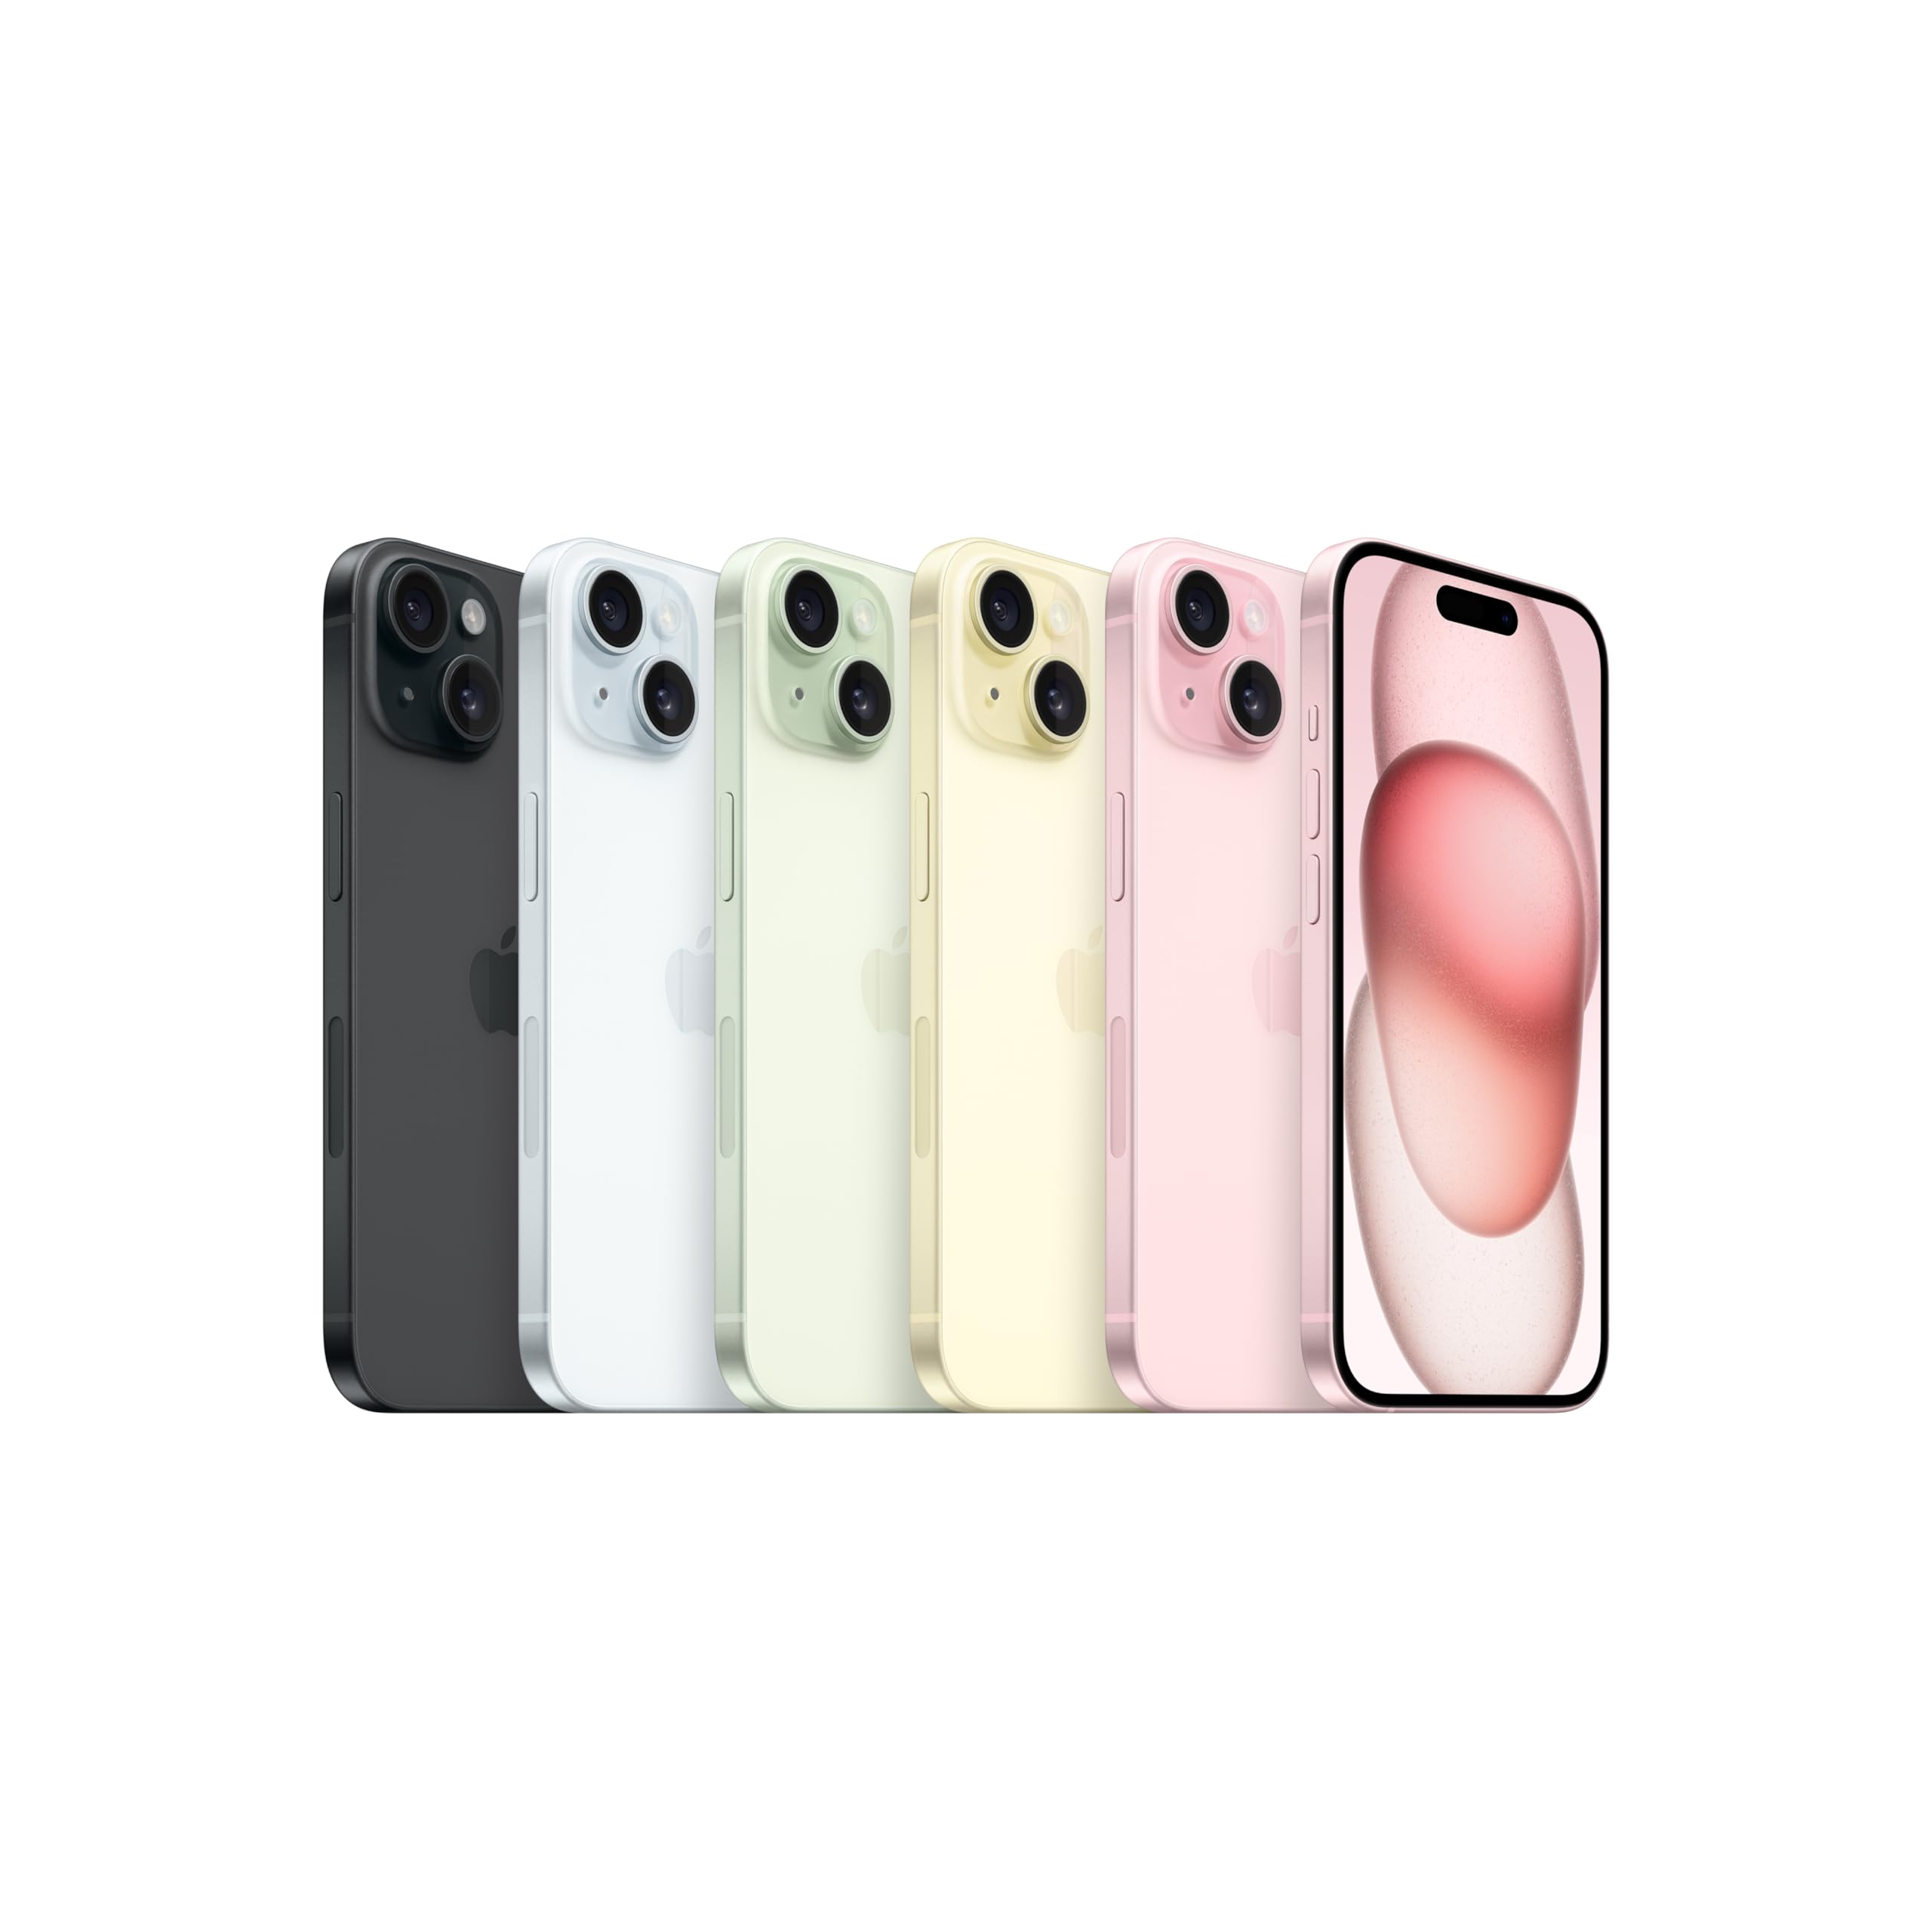 Apple iPhone 15 (256 GB) - Black | [Locked] | Boost Infinite plan required starting at $60/mo. | Unlimited Wireless | No trade-in needed to start | Get the latest iPhone every year